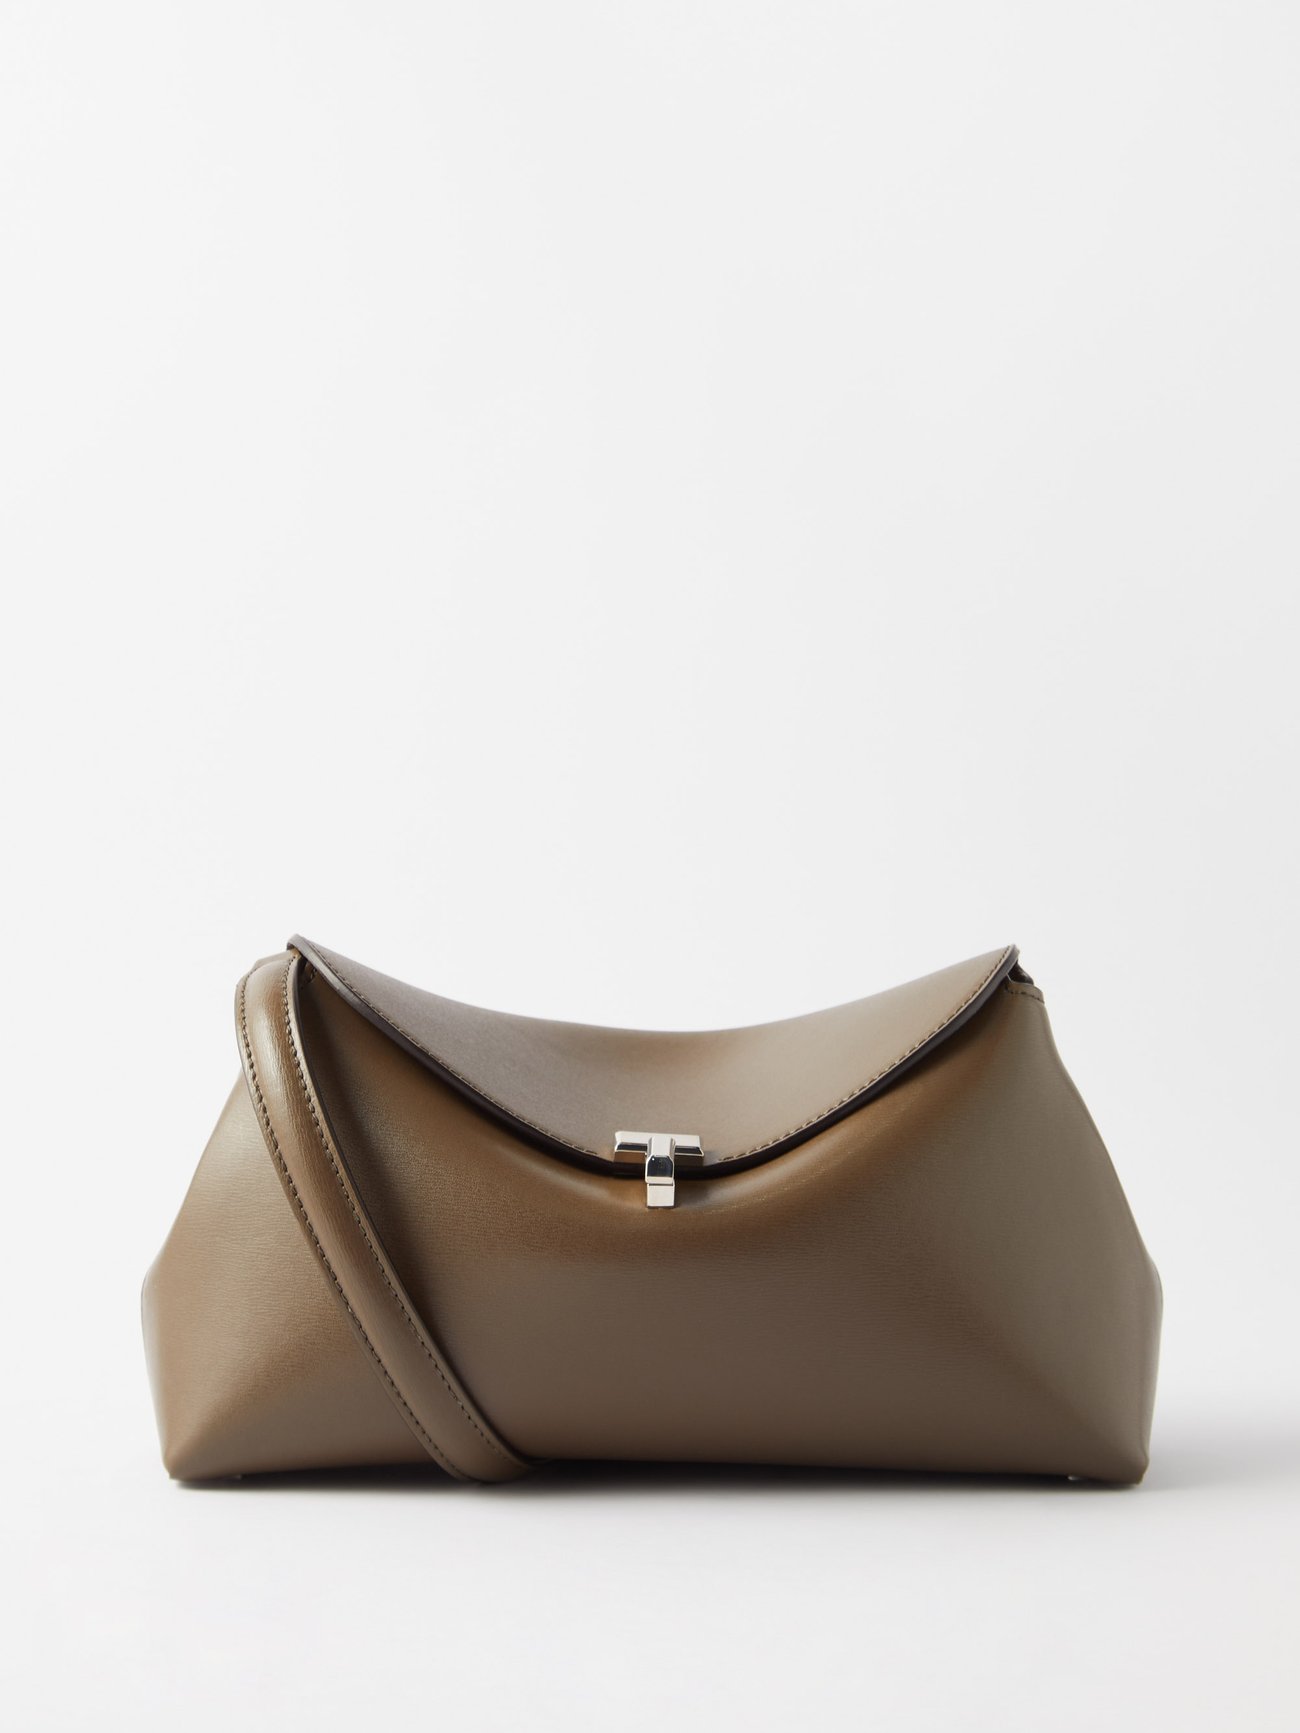 Grained-Leather Cross-Body Bag